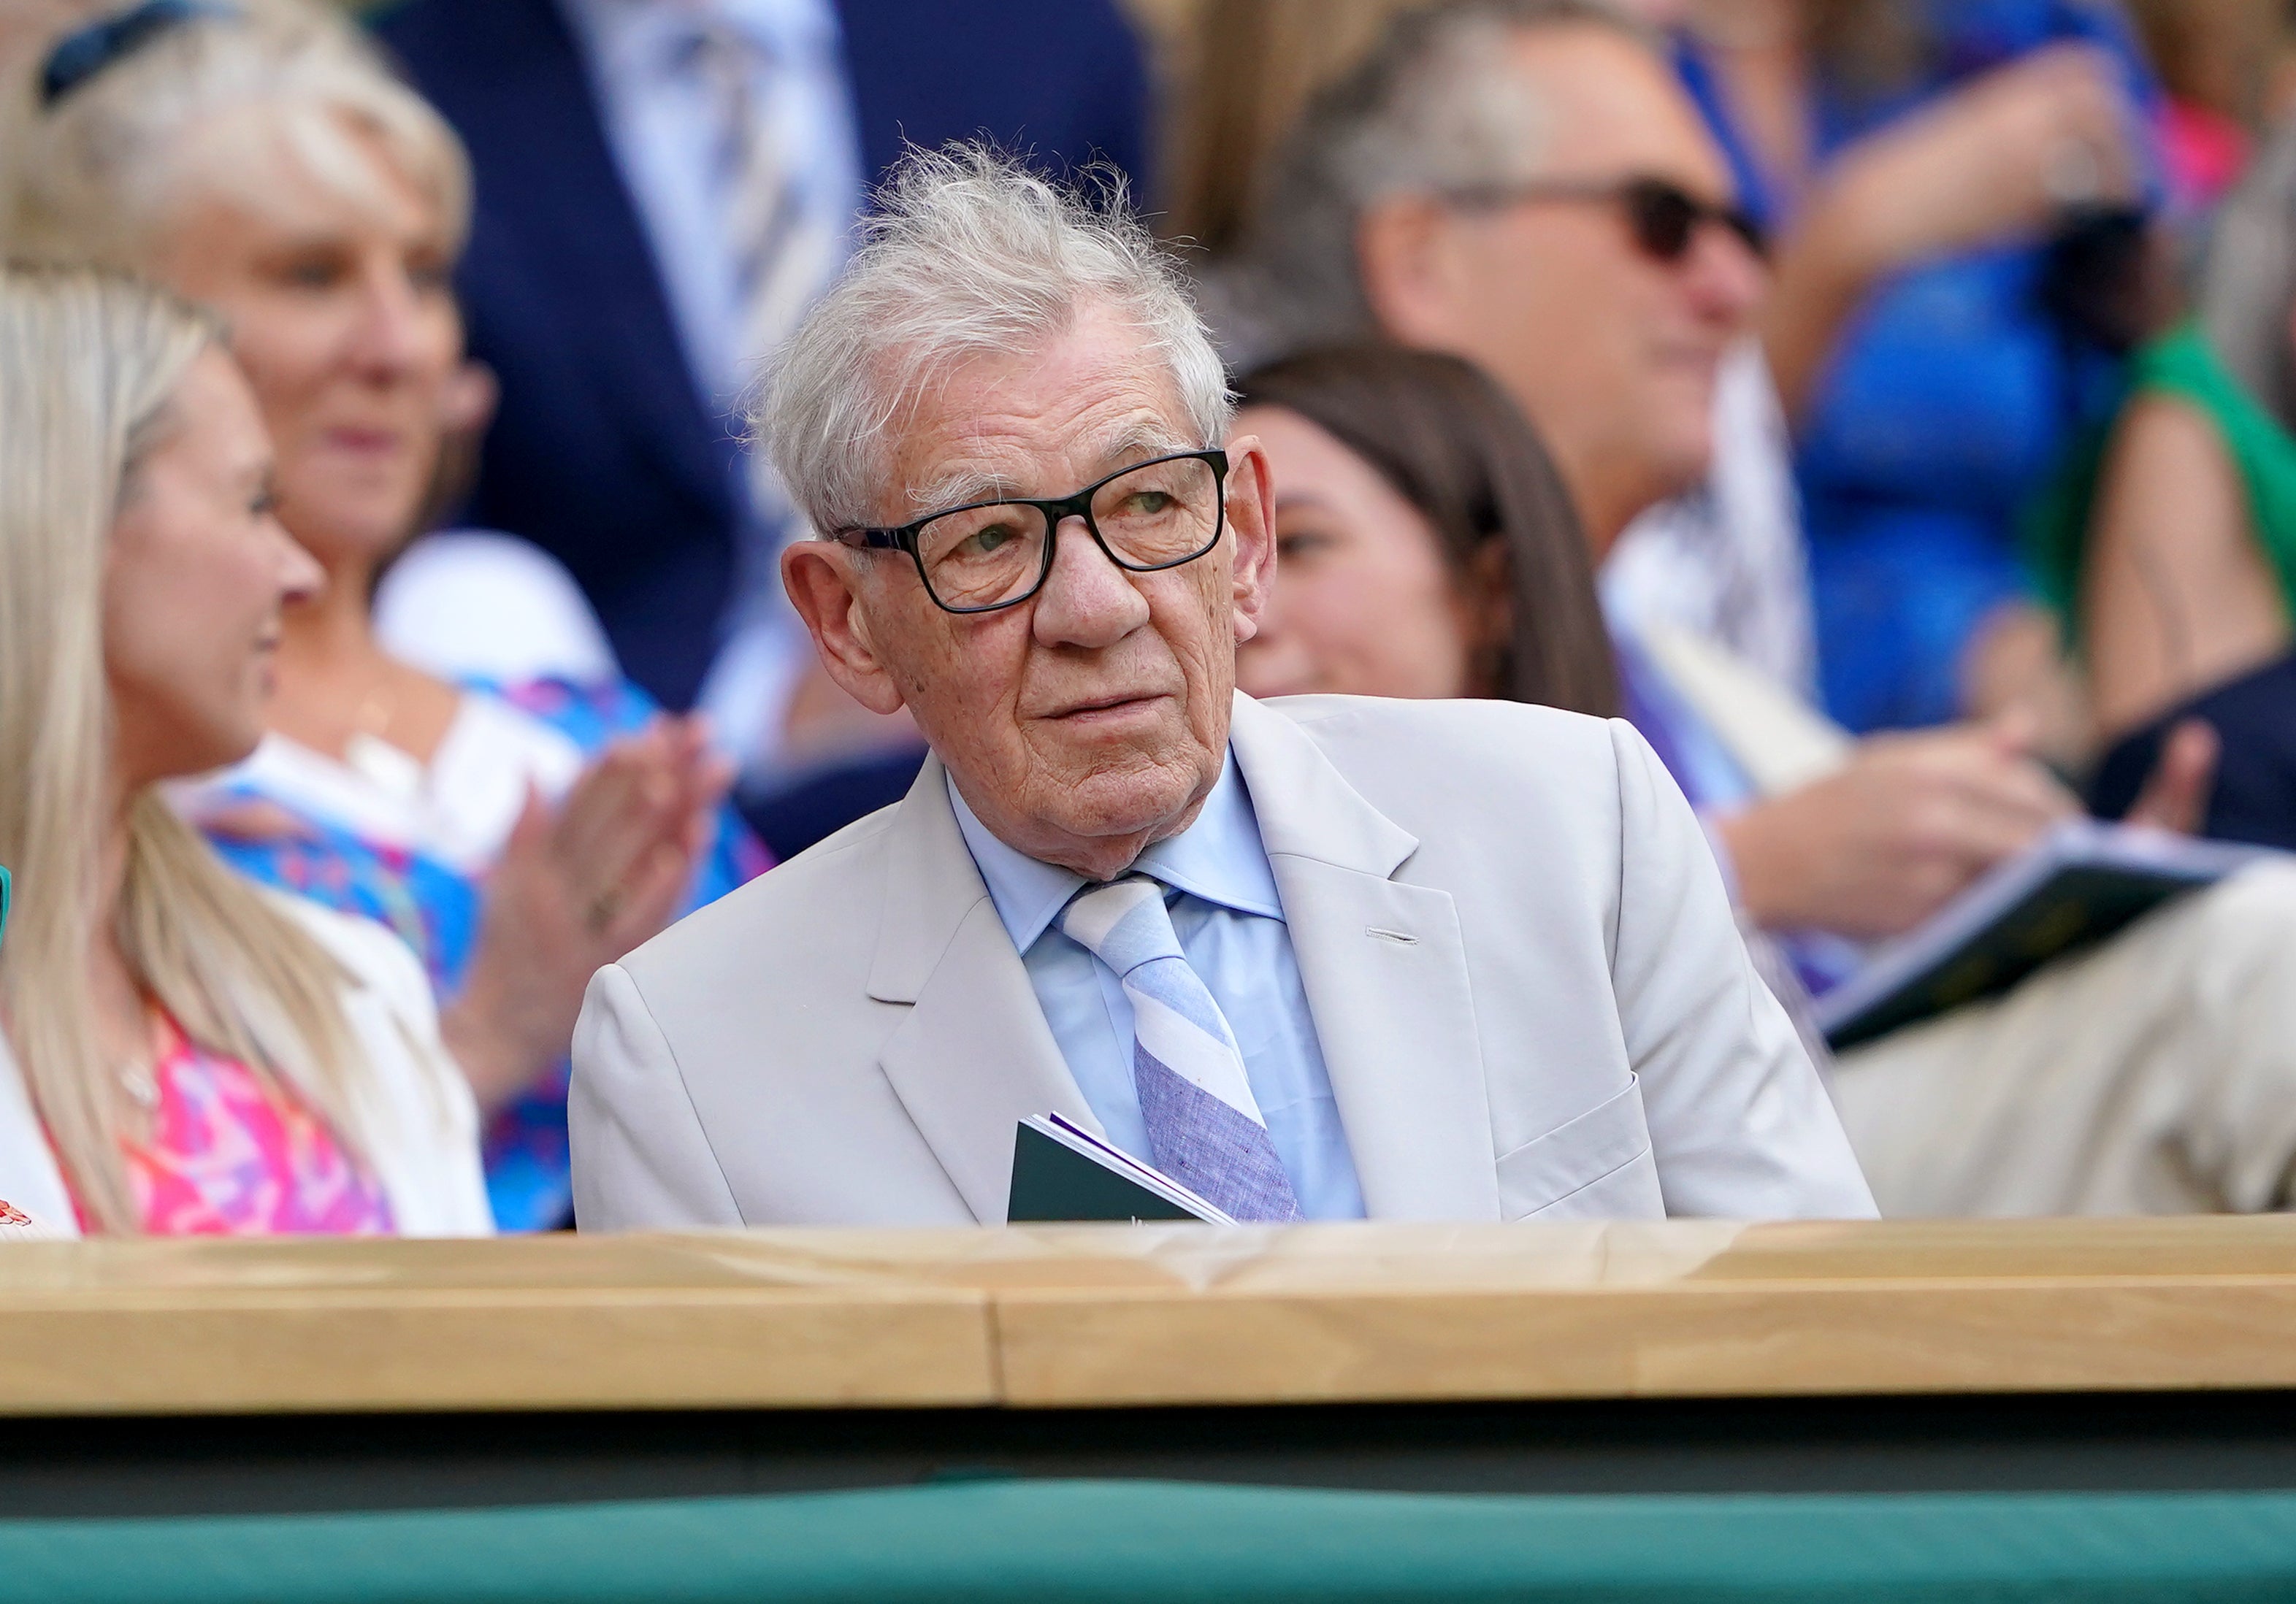 Sir Ian McKellen was among the well-known faces in the Centre Court crowd on day eight of the 2022 Wimbledon Championships (Zac Goodwin/PA)